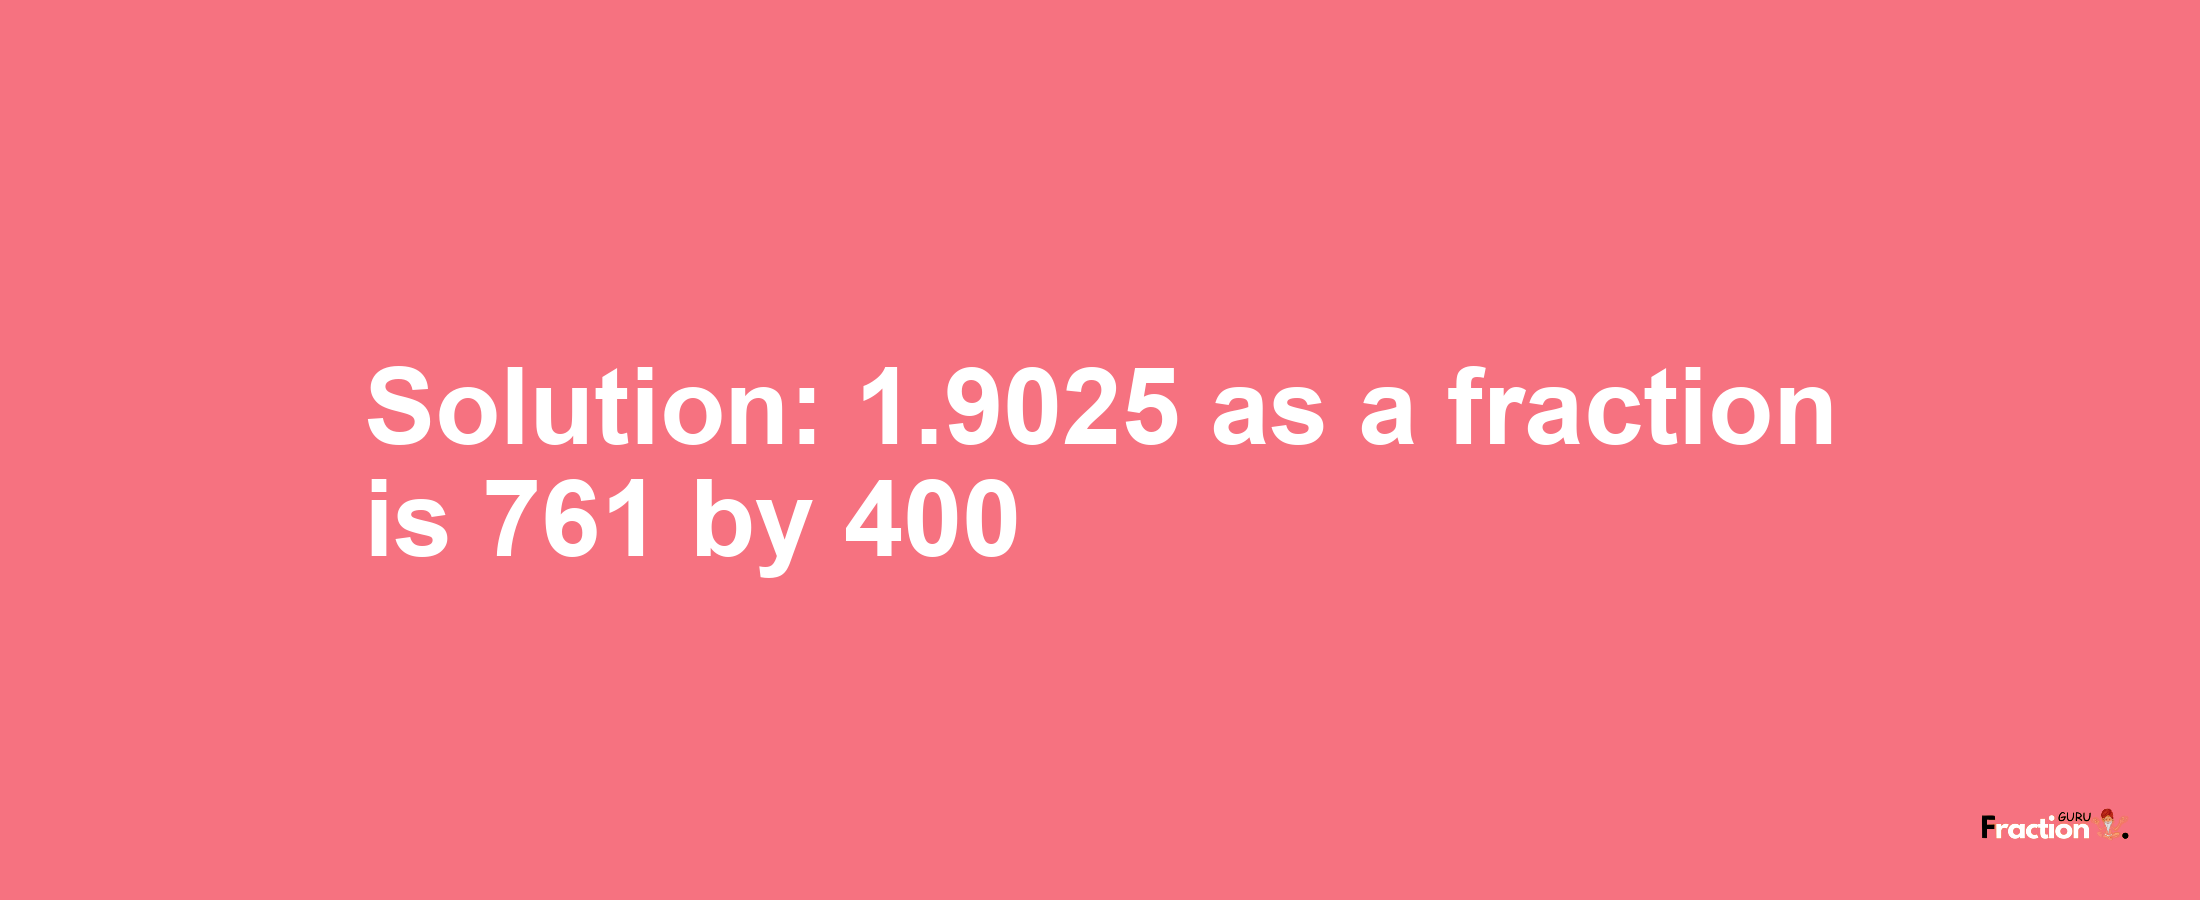 Solution:1.9025 as a fraction is 761/400